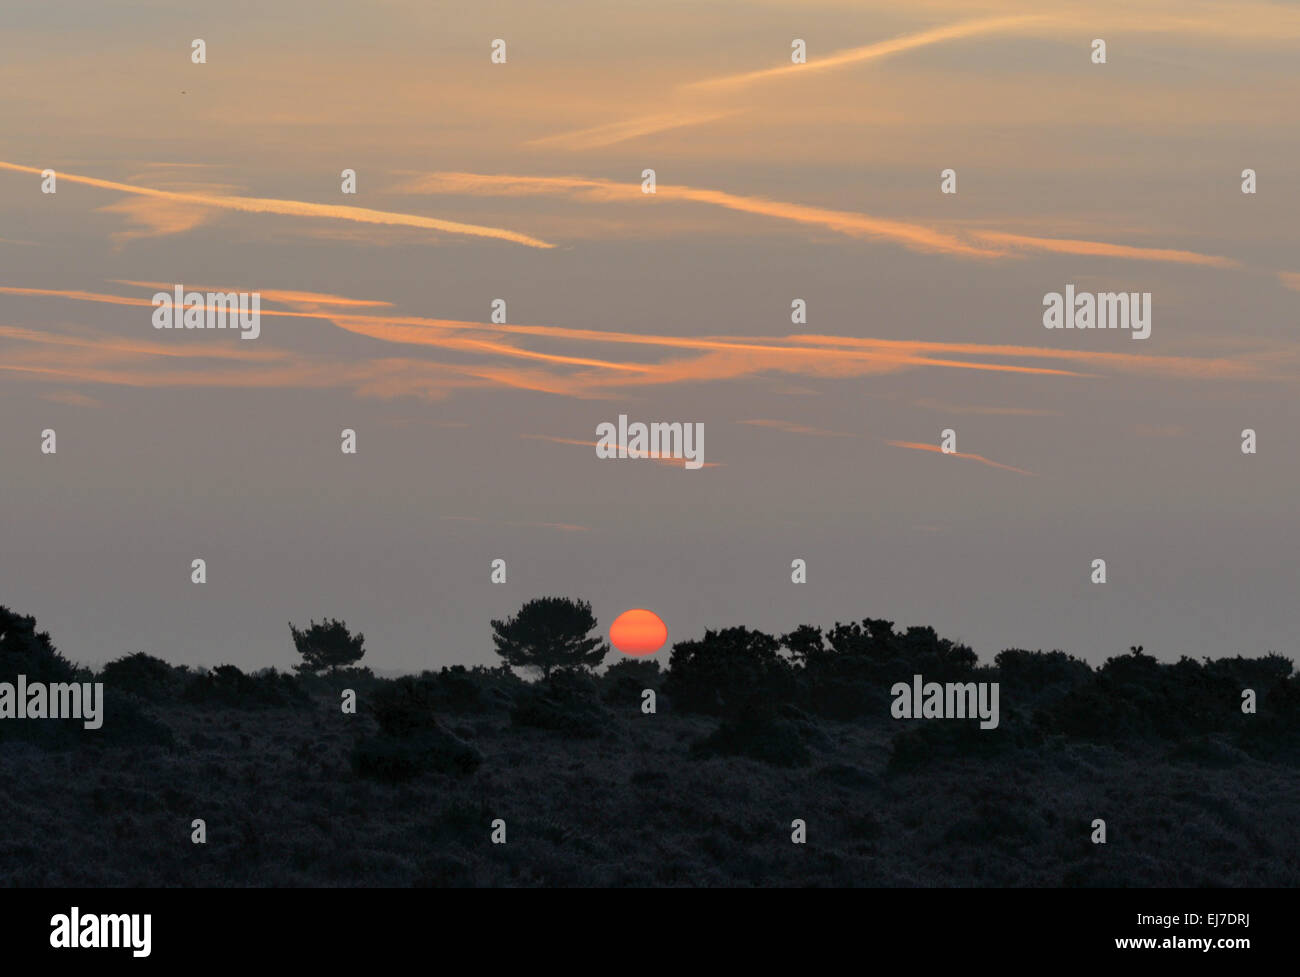 Sun rising like an orange in the sky over a tree-lined horizon Stock Photo